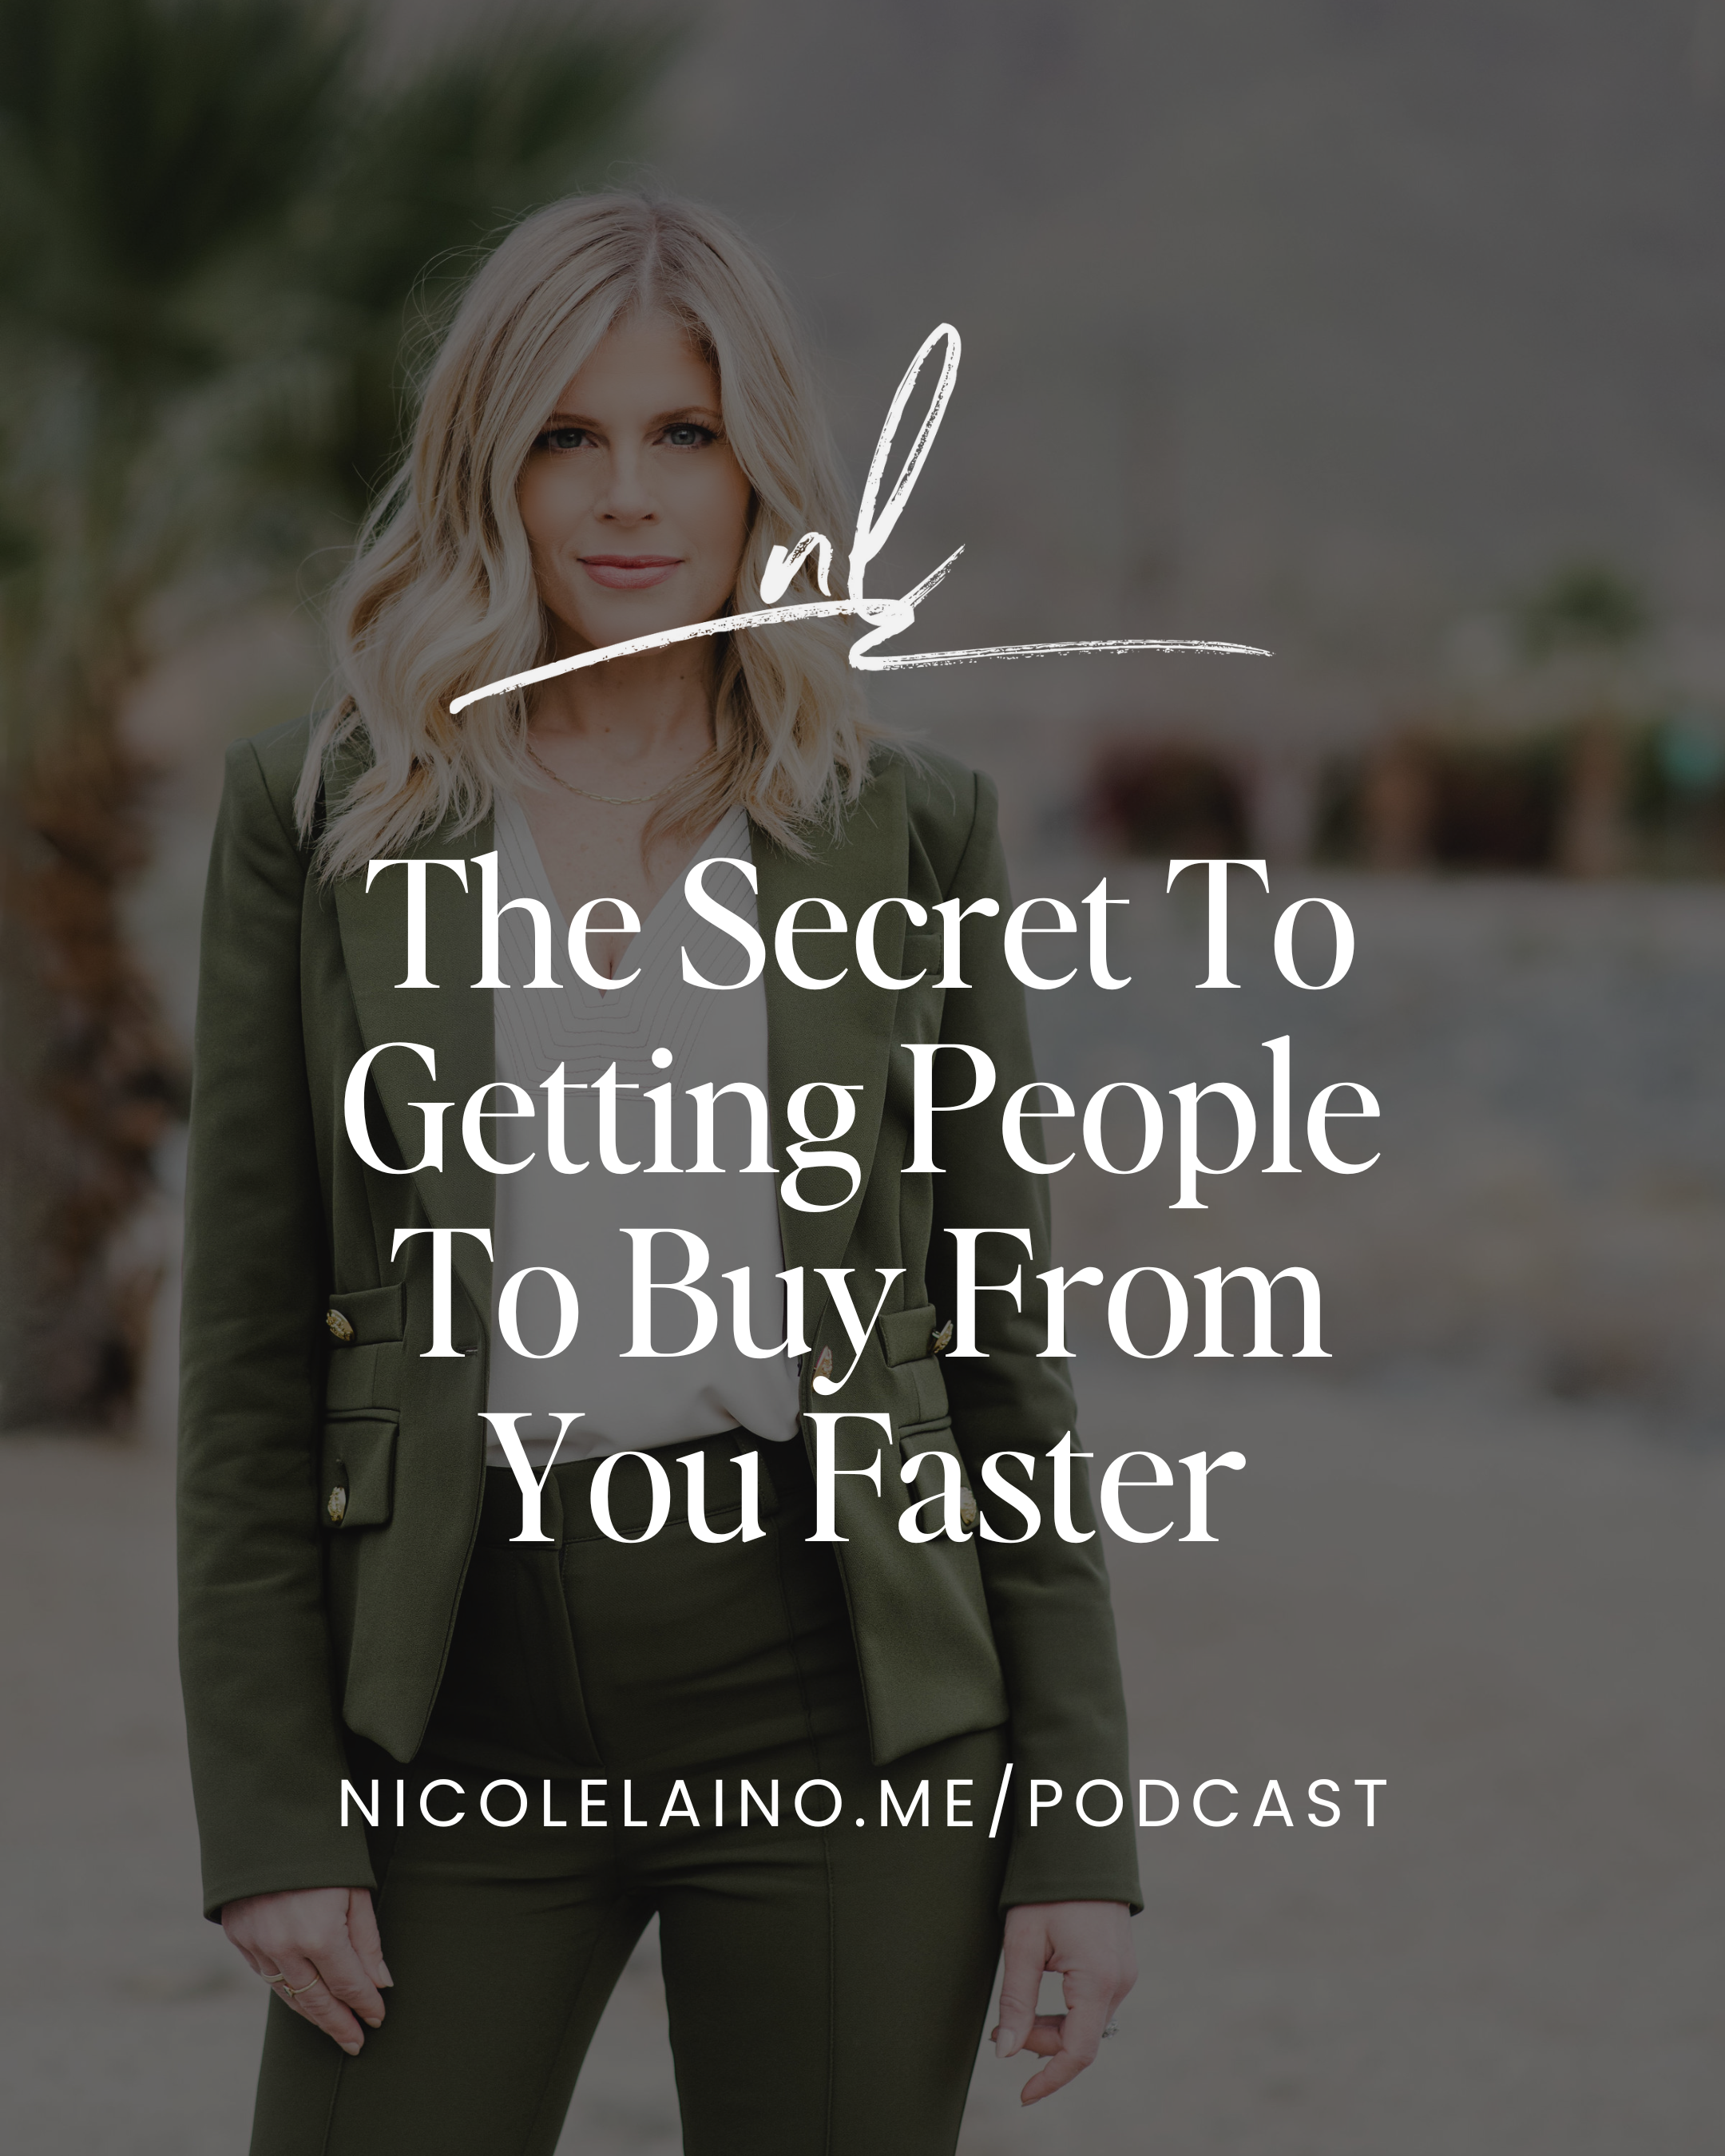 The Secret To Getting People To Buy From You Faster